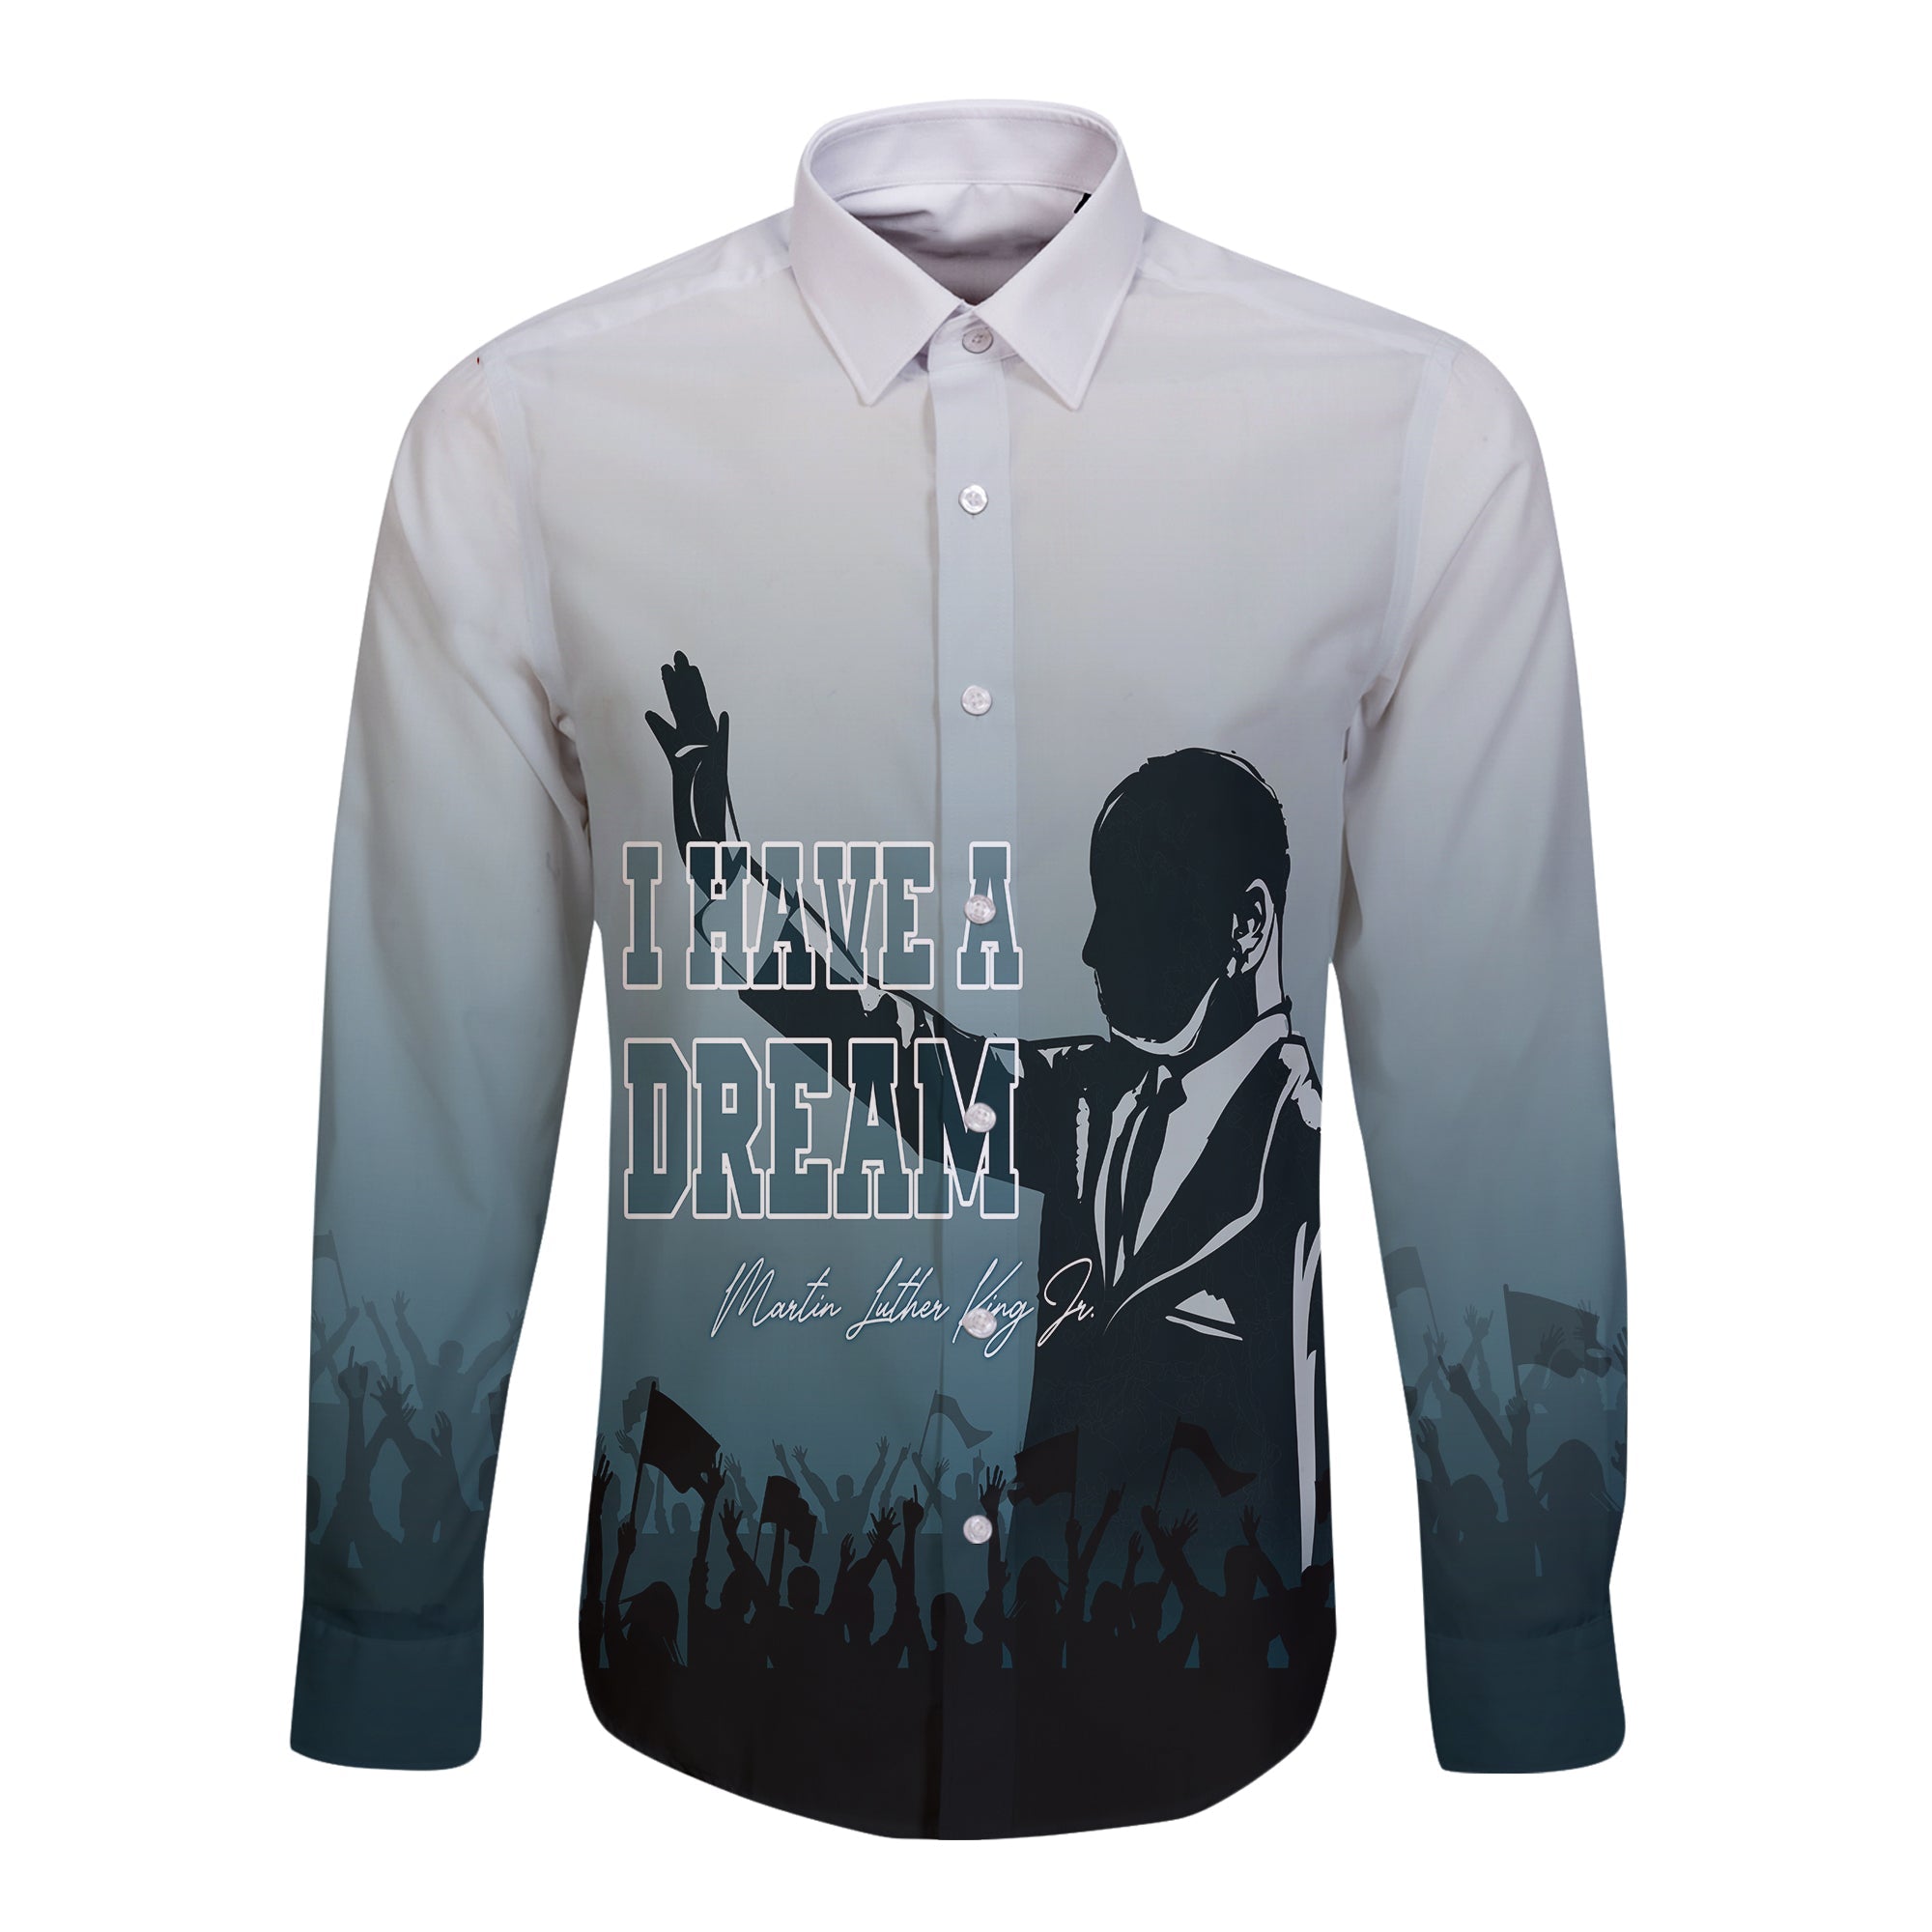 mlk-day-long-sleeves-button-shirt-i-have-a-dream